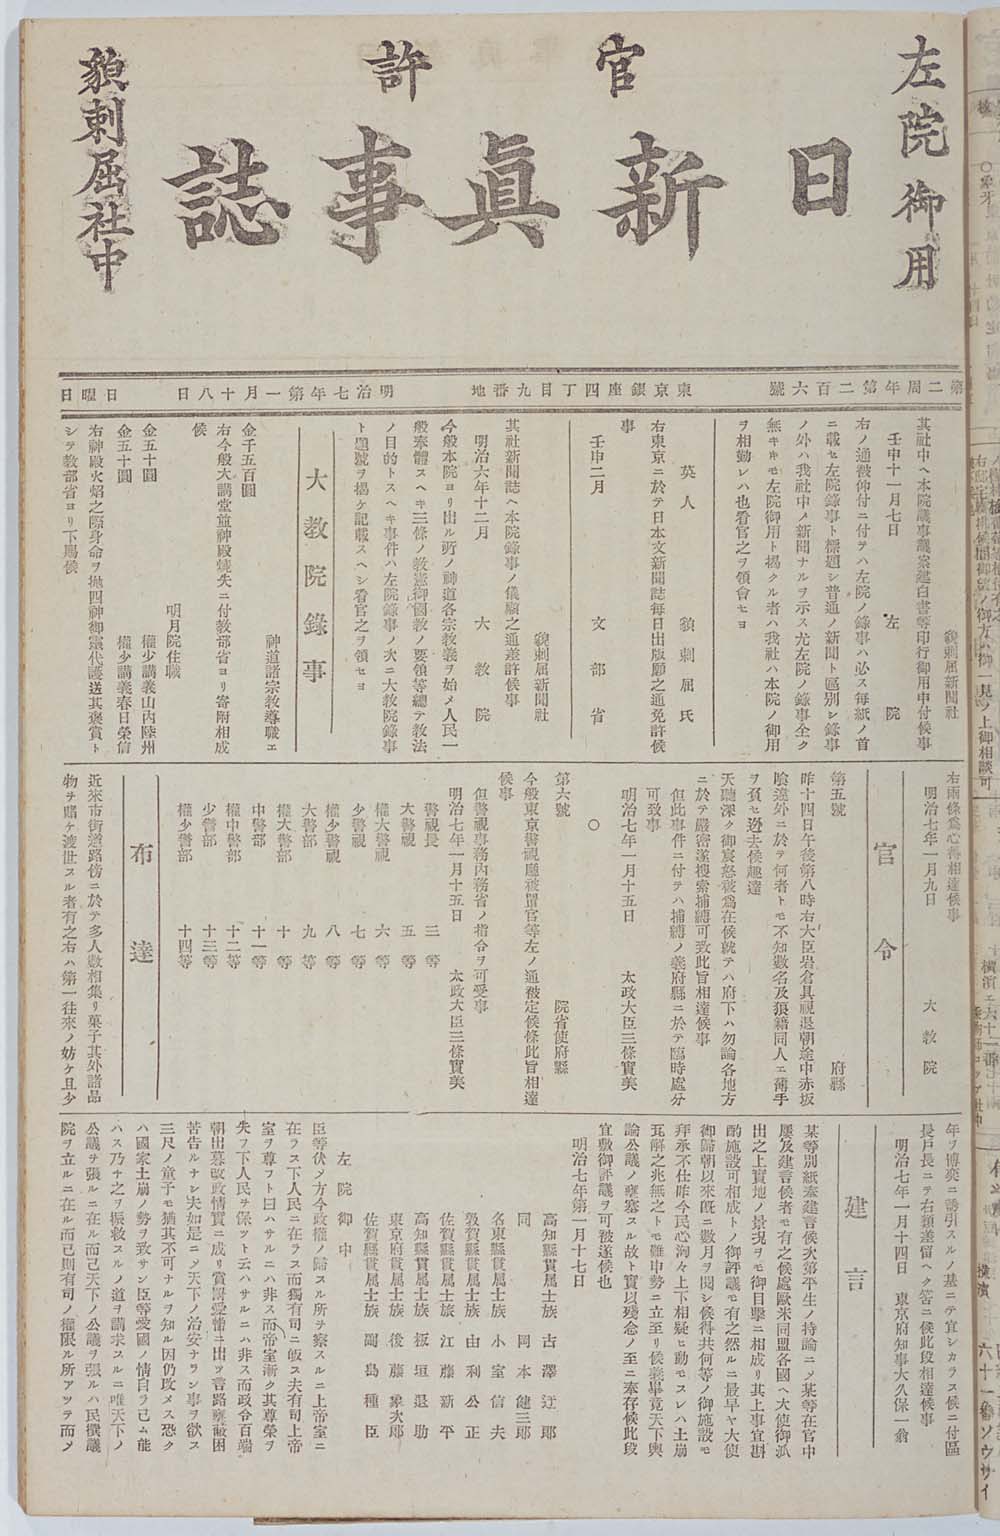 "Nisshin Shinjishi" no.206 (1874.1.18) in which was printed "The Petition calling for the Establishment of a Popularly-elected Assembly"(larger)